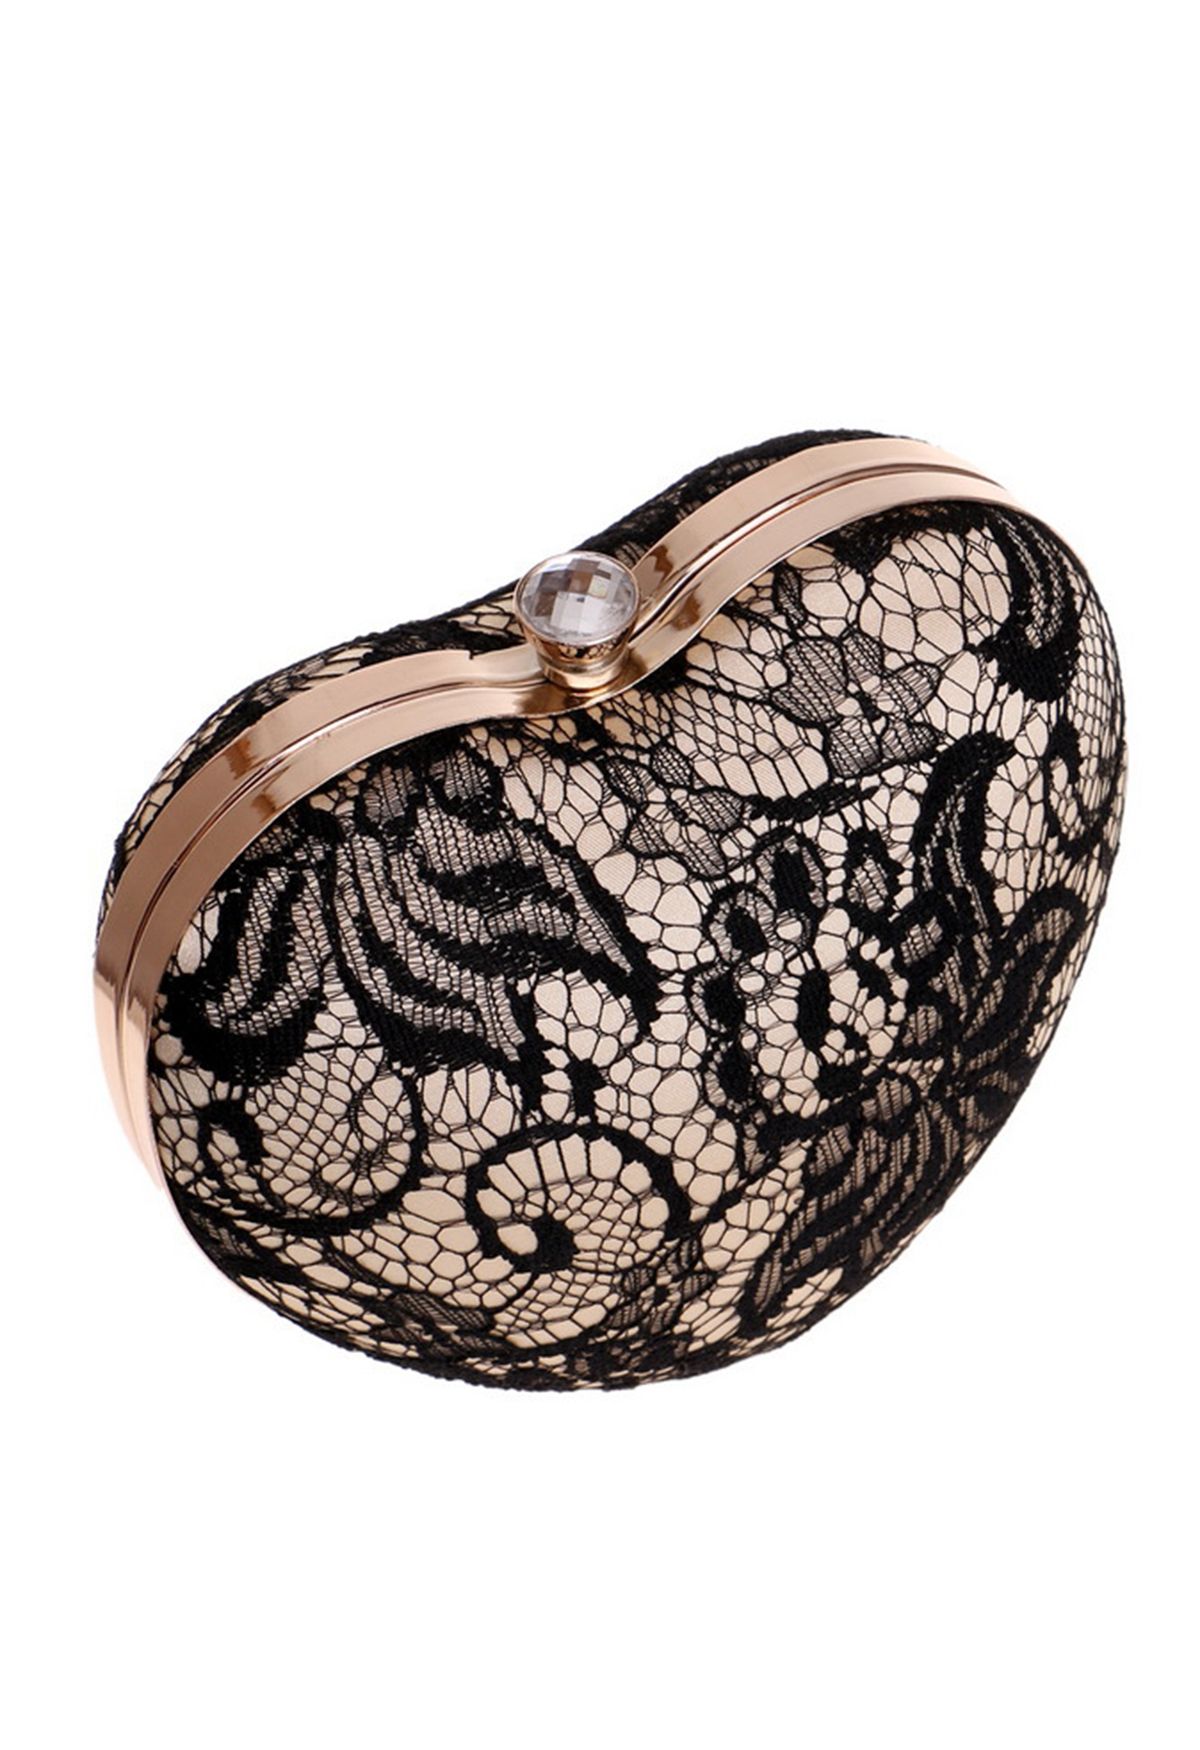 Mysterious Lace Heart Shape Clutch in Black